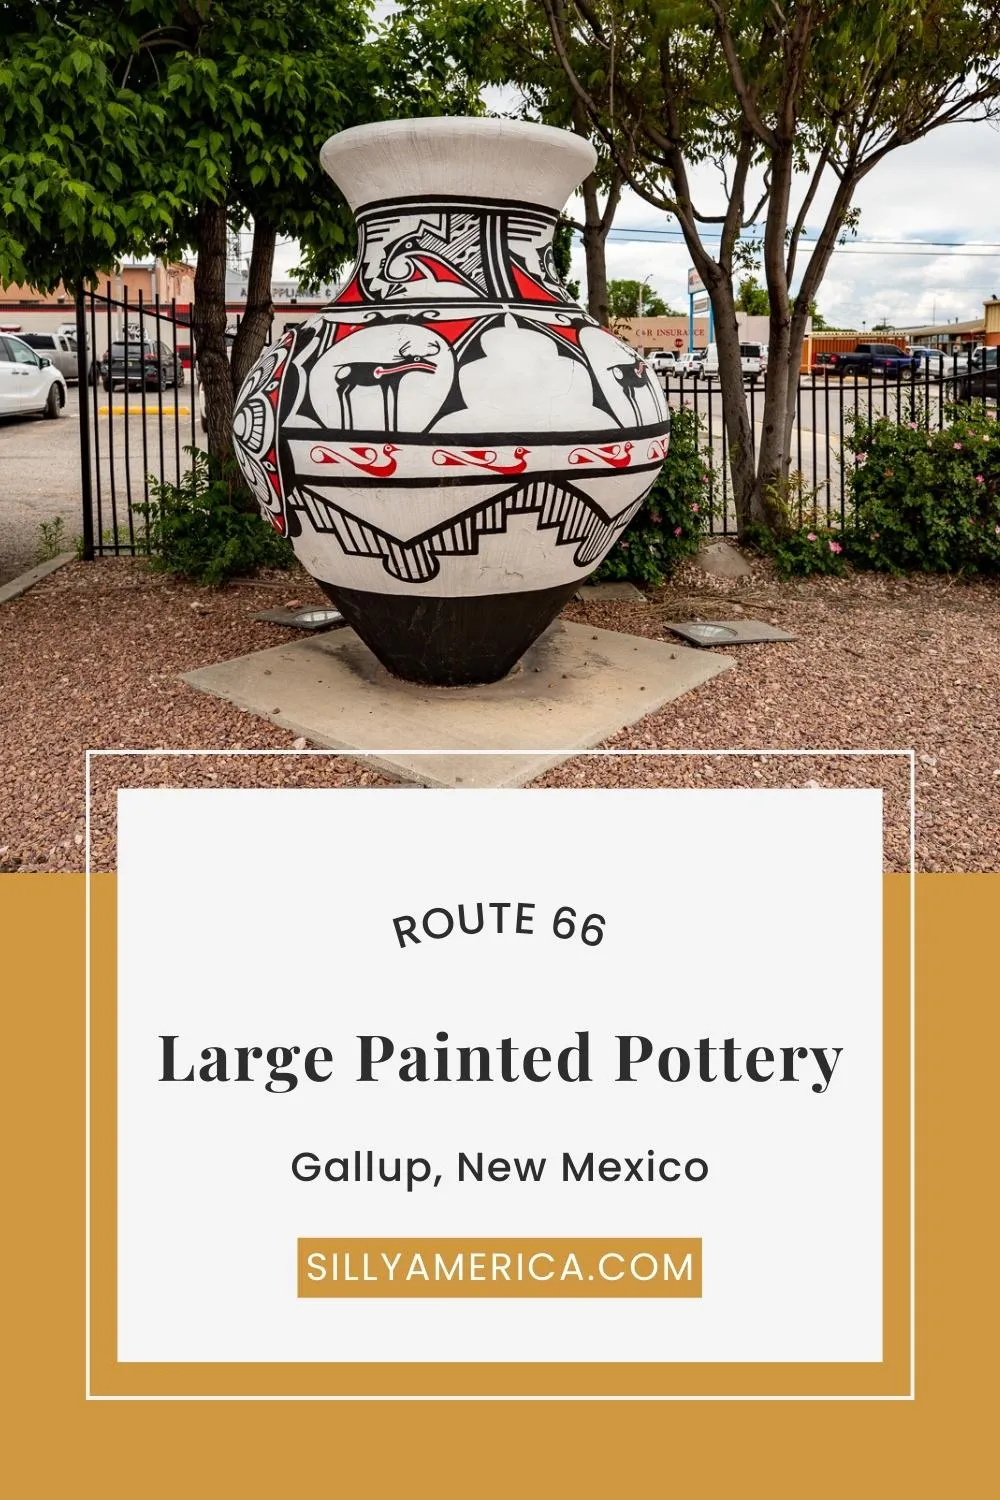 There are many fun Route 66 attractions to explore in Gallup, New Mexico. While you're checking out the town there's a particular piece that might catch your eye over and over again. The Large Painted Pottery in Gallup, New Mexico. The painted pottery project was started as a way to beautify the ramps from I-40 into Gallup. Visit these fun Route 66 roadside attractions on a Route 66 road trip in New Mexico! #RoadsideAttraction #RoadsideAttractions #RoadTrip #Route66 #Route66RoadTrip